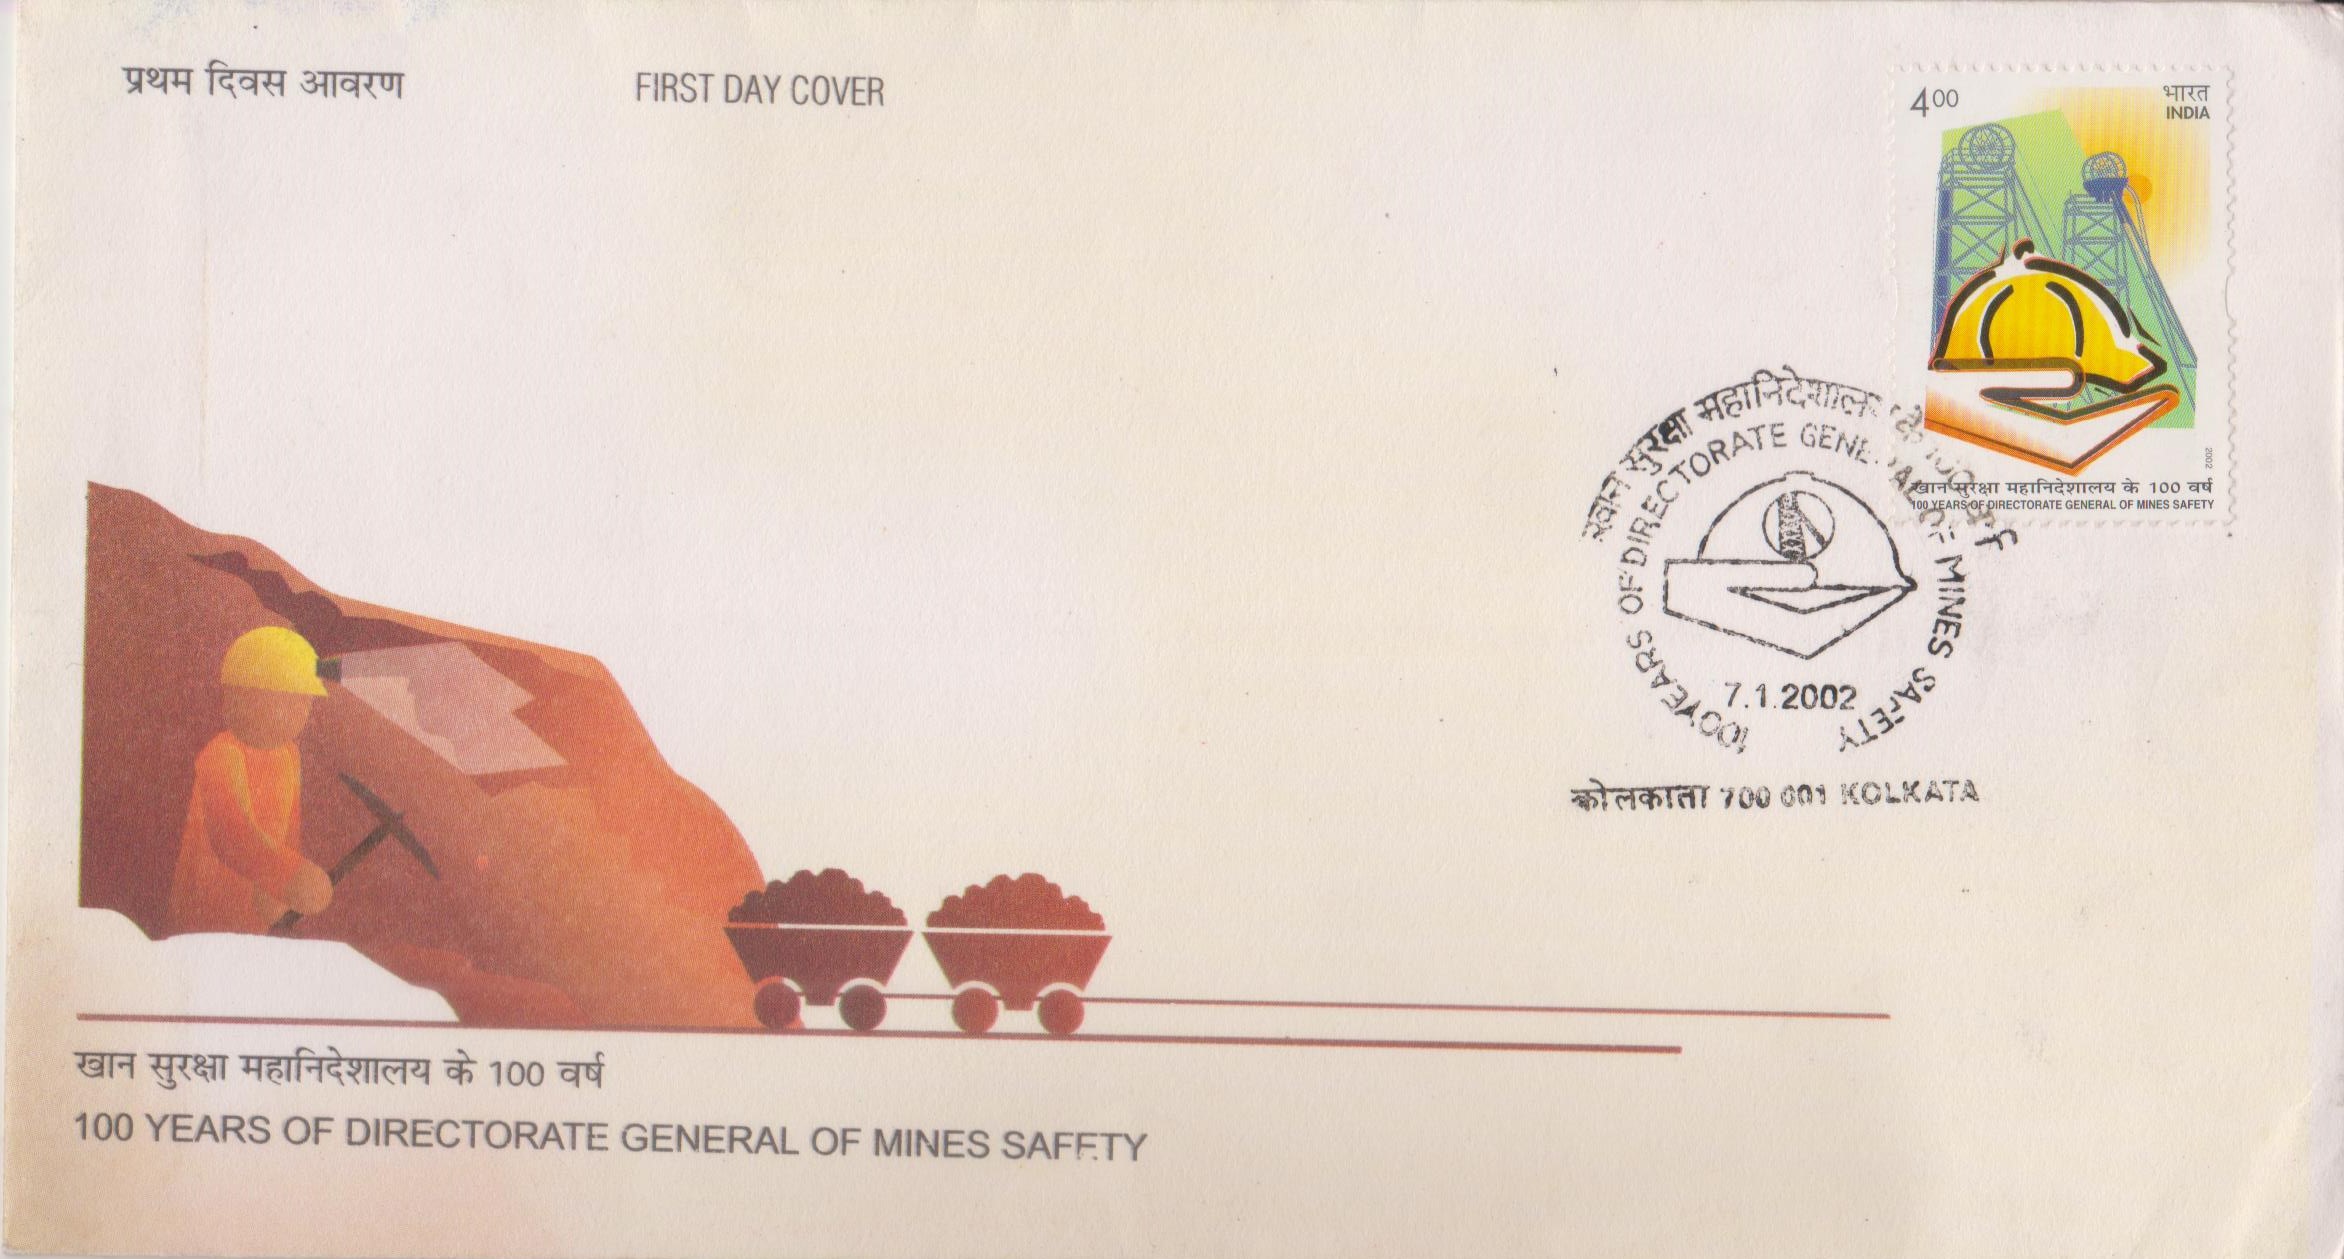 DGMS, First Day Cover image, jpeg, Union Ministry of Labour & Employment